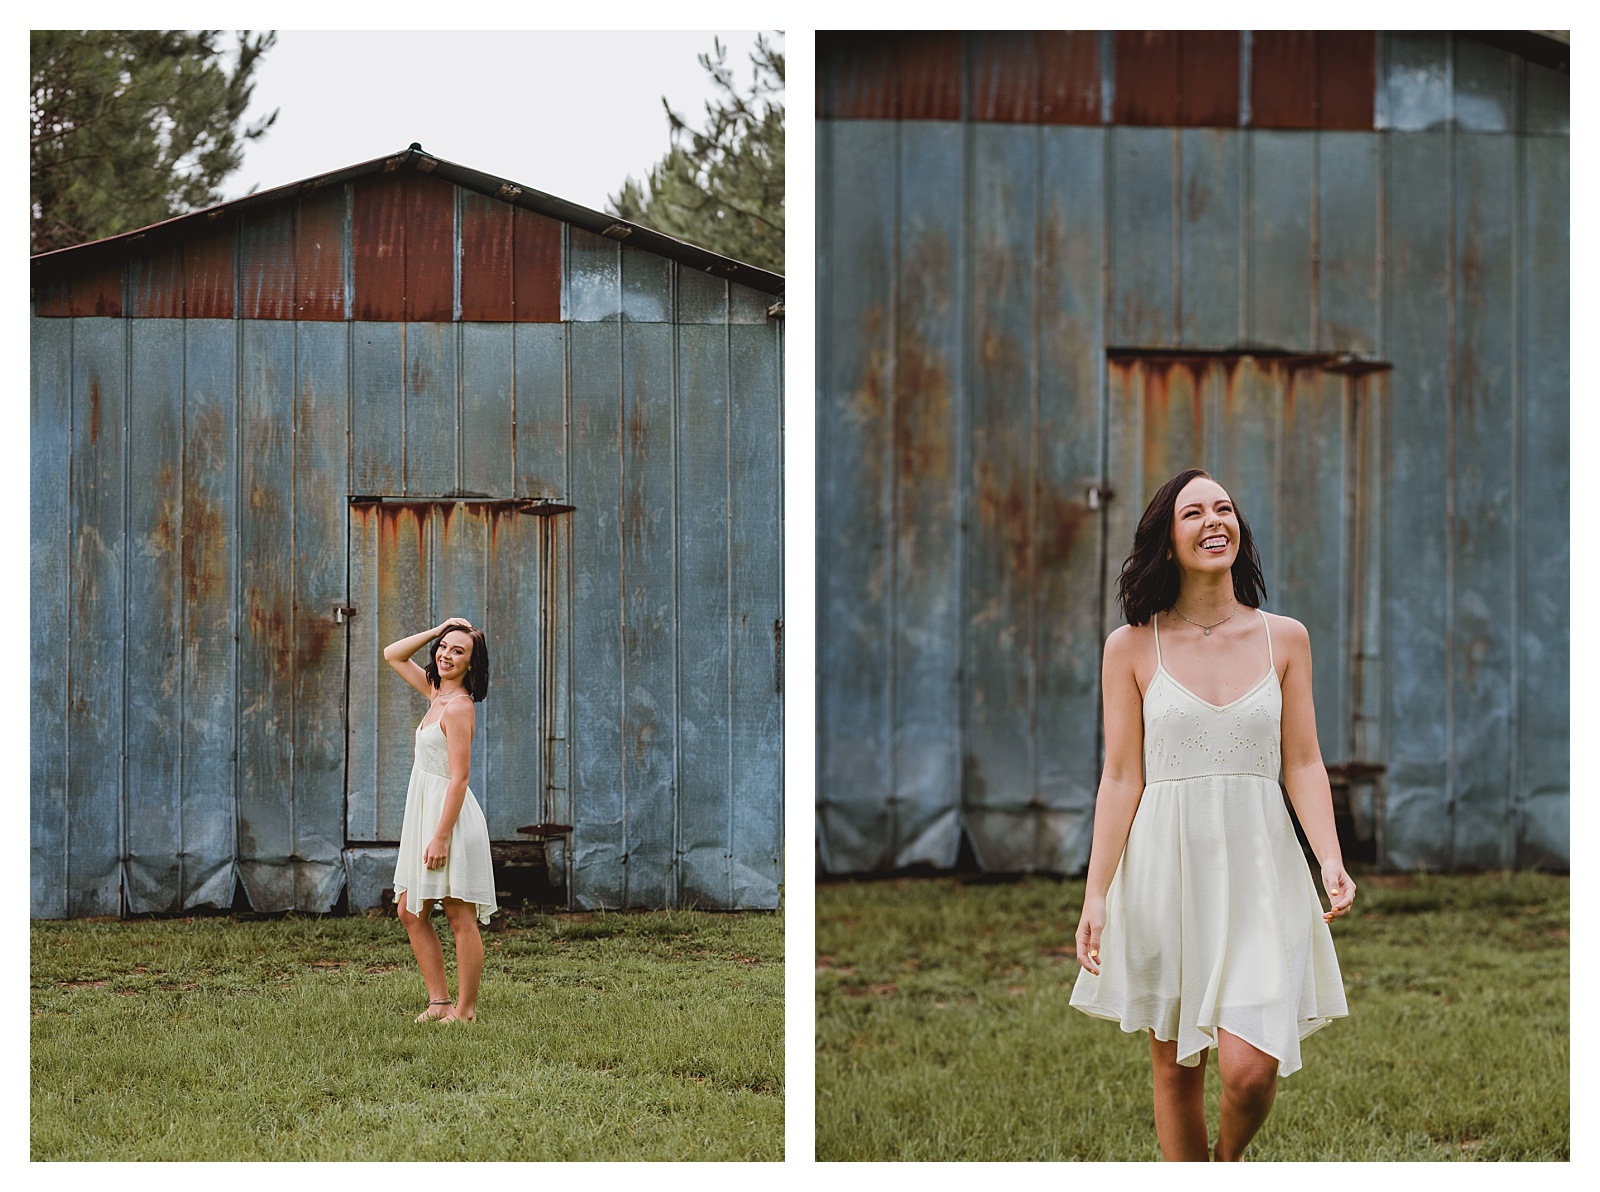 Rustic barn photos in North Florida by Shelly Williams Photography